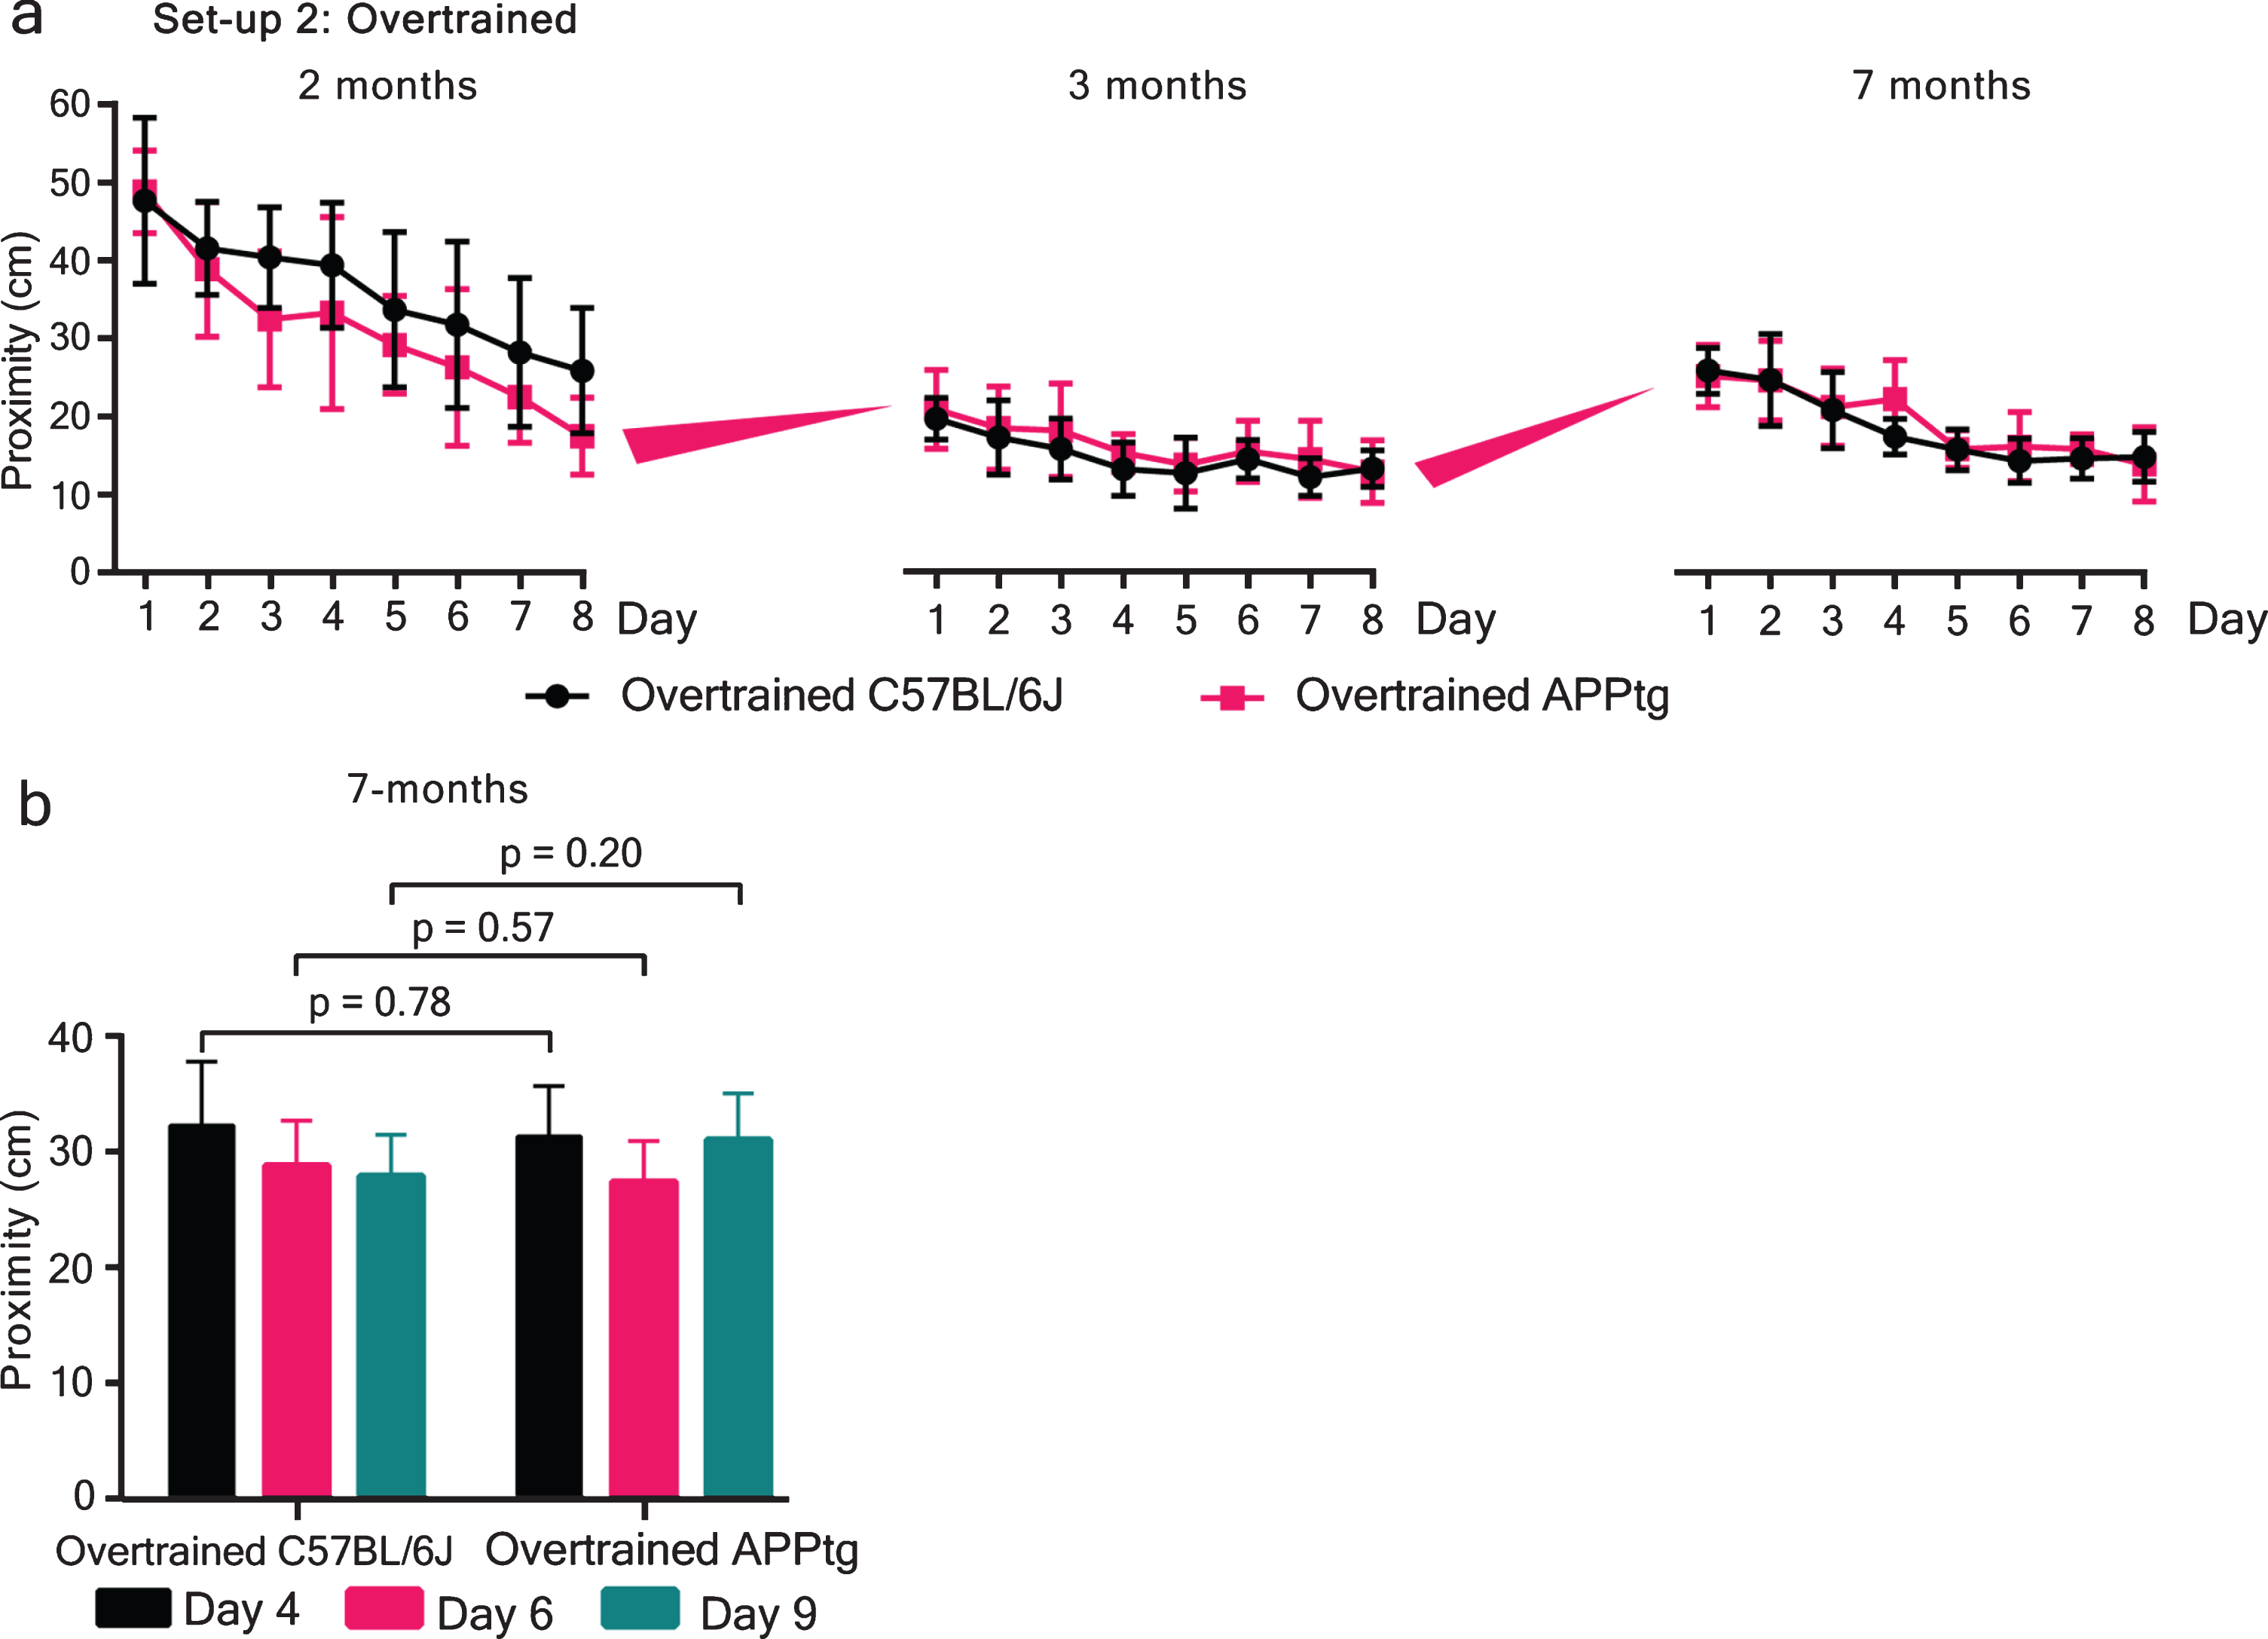 Cognitive overtraining rescues forgetting and improves memory reactivation in APPtg mice. a) In Set-up II (over-trained group), we started training mice at 2 months of age, retrained them at 3 months, and assessed the WM performance at 7 months of age. At 2 months, we did not find any significant difference between overtrained C57BL/6J and overtrained APPtg [F(1,17)=1.83, p = 0.19]. Retraining of the same animals at 3 months of age also did not show any significant group difference [F(1,17)=0.80, p = 0.38]. Finally, the effect of cognitive overtraining was assessed at 7 months of age and no group difference was observed between overtrained C57BL/6J and overtrained APPtg mice [F(1,17)=0.63, p = 0.43]. b) Performance of animals during probe trials. Three independent probe trials were given before normal training trials on day 4, 6, and 9, respectively, in which mice were allowed to swim for 30 s. Two-tailed unpaired t-tests were performed between groups on each probe trial. Proximity (in cm) was used as a measure of spatial learning and memory. Overtrained C57BL/6J: 7 months of age: 11 animals and overtrained APPtg: 8 animals. Values are mean±95% confidence interval.